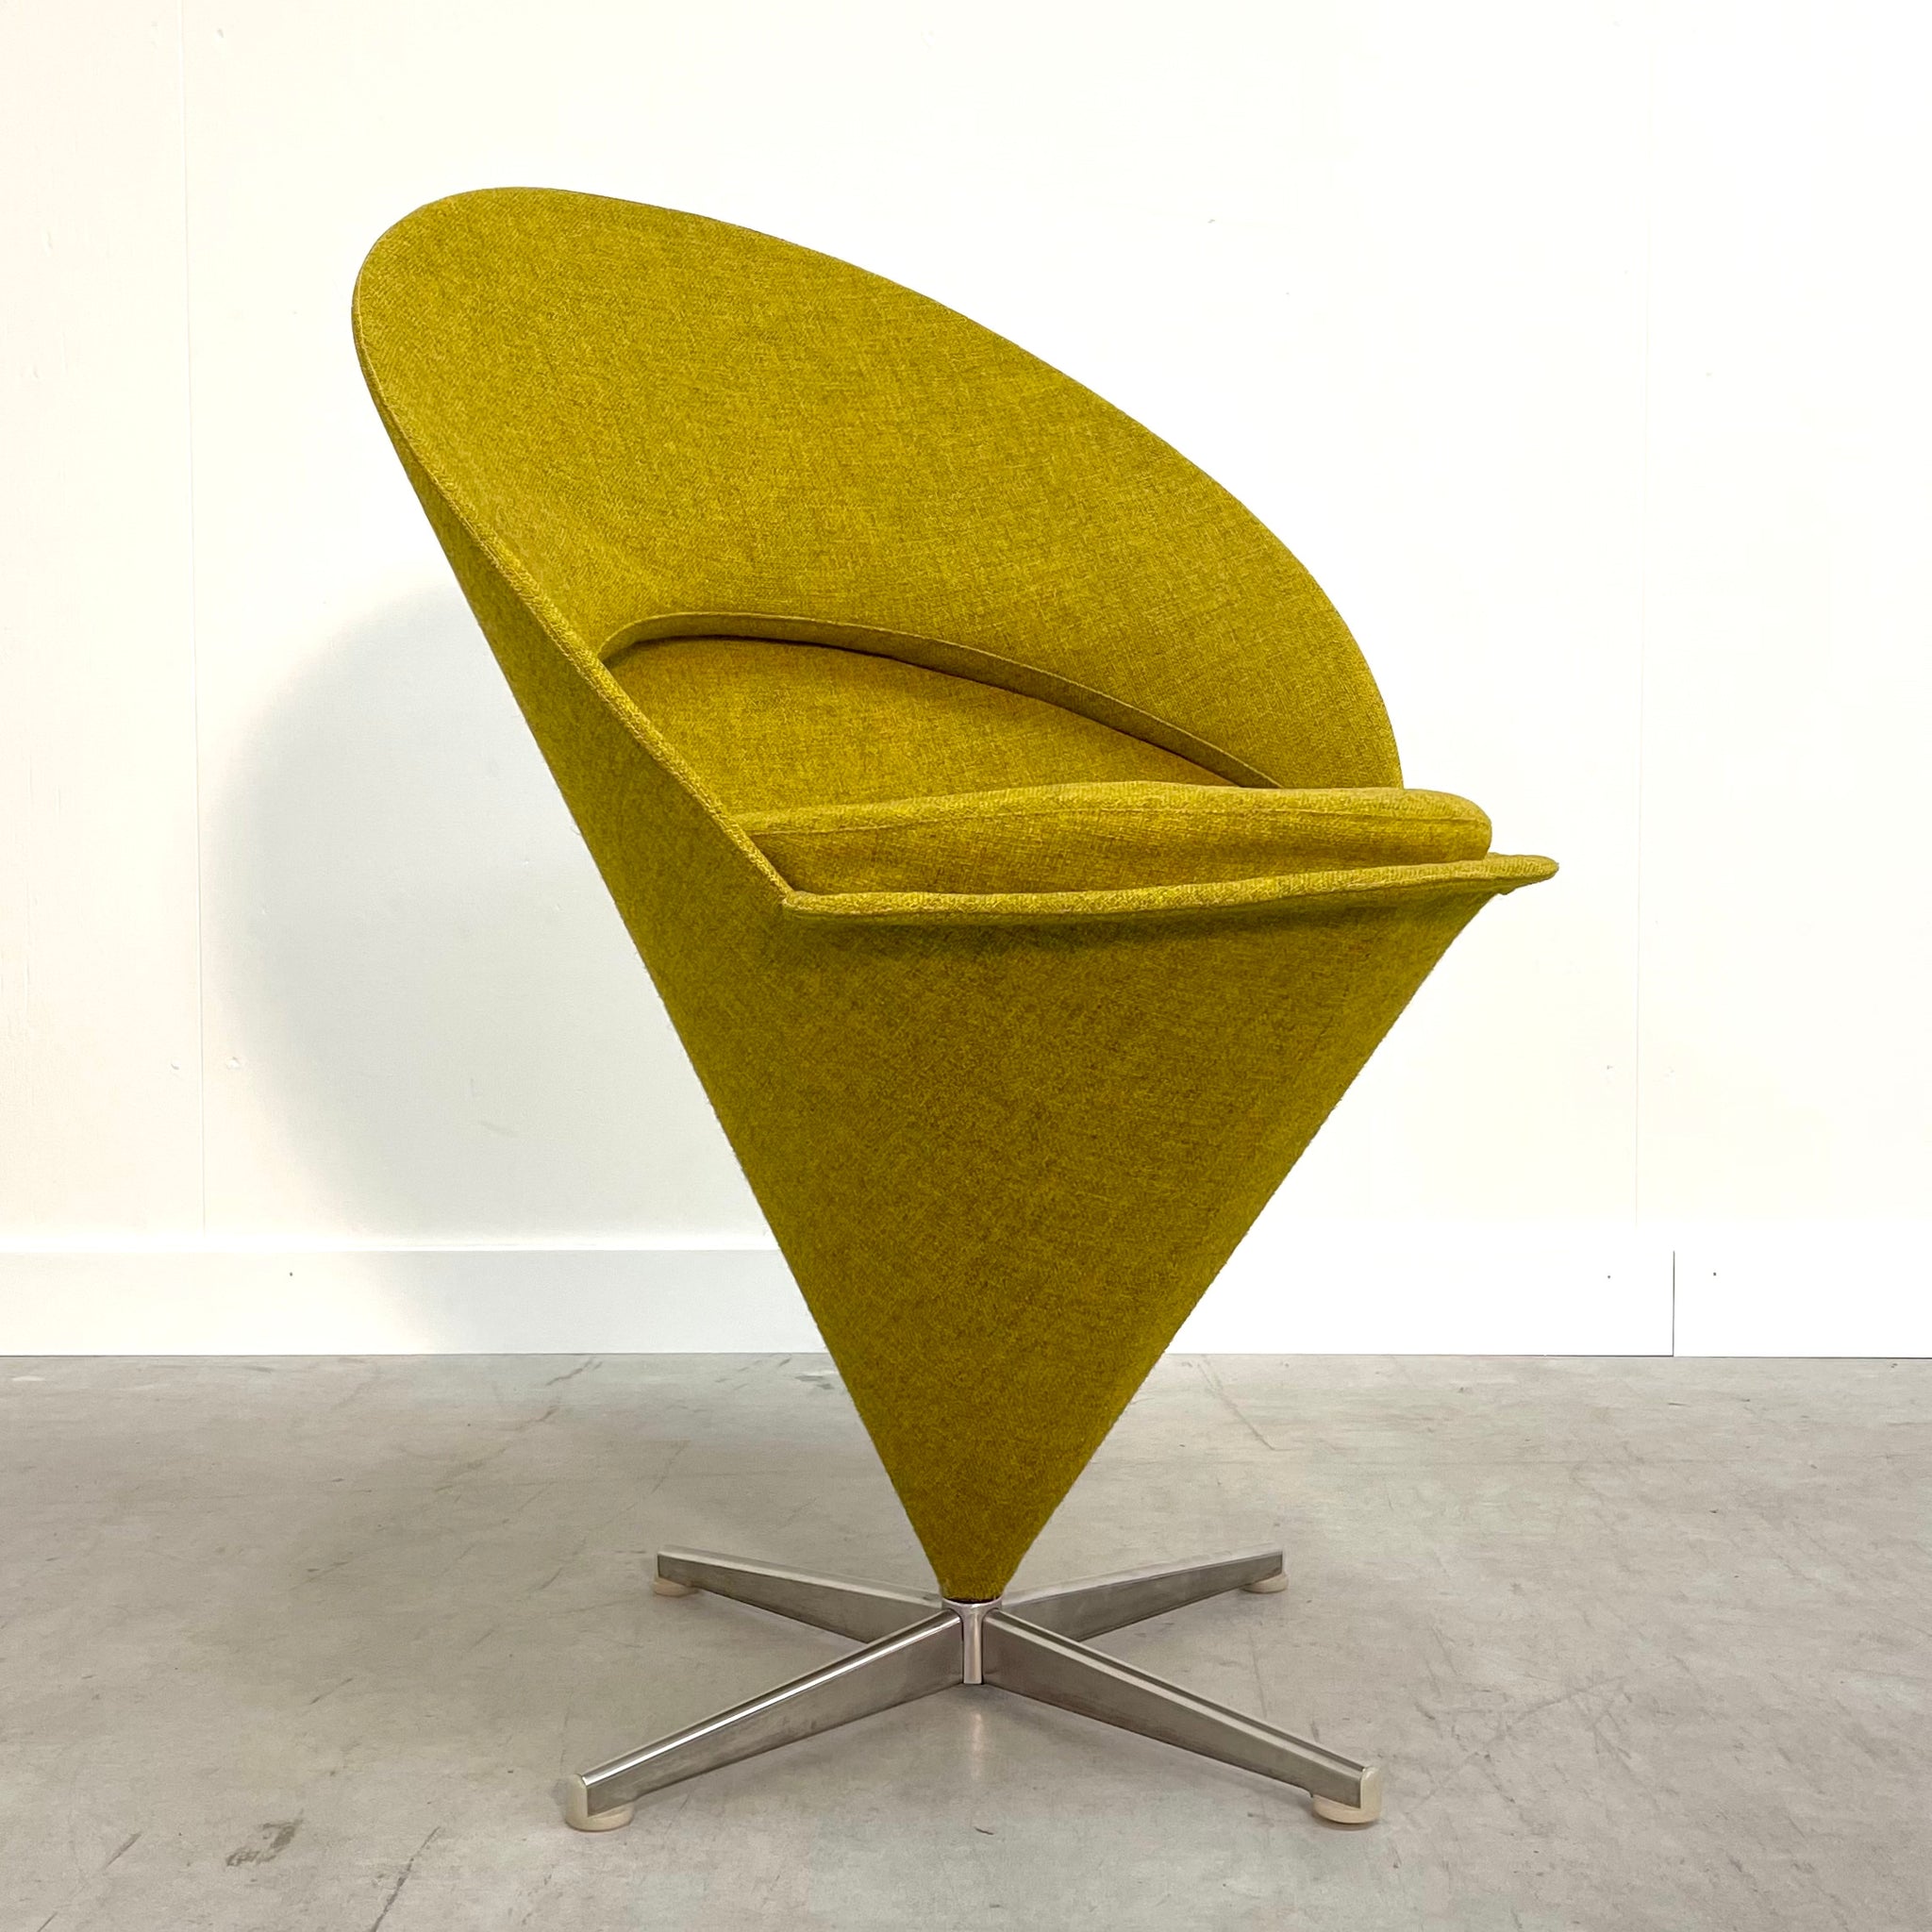 Cone chair K1 by Verner Panton for Plus-Line, Denmark 1960s